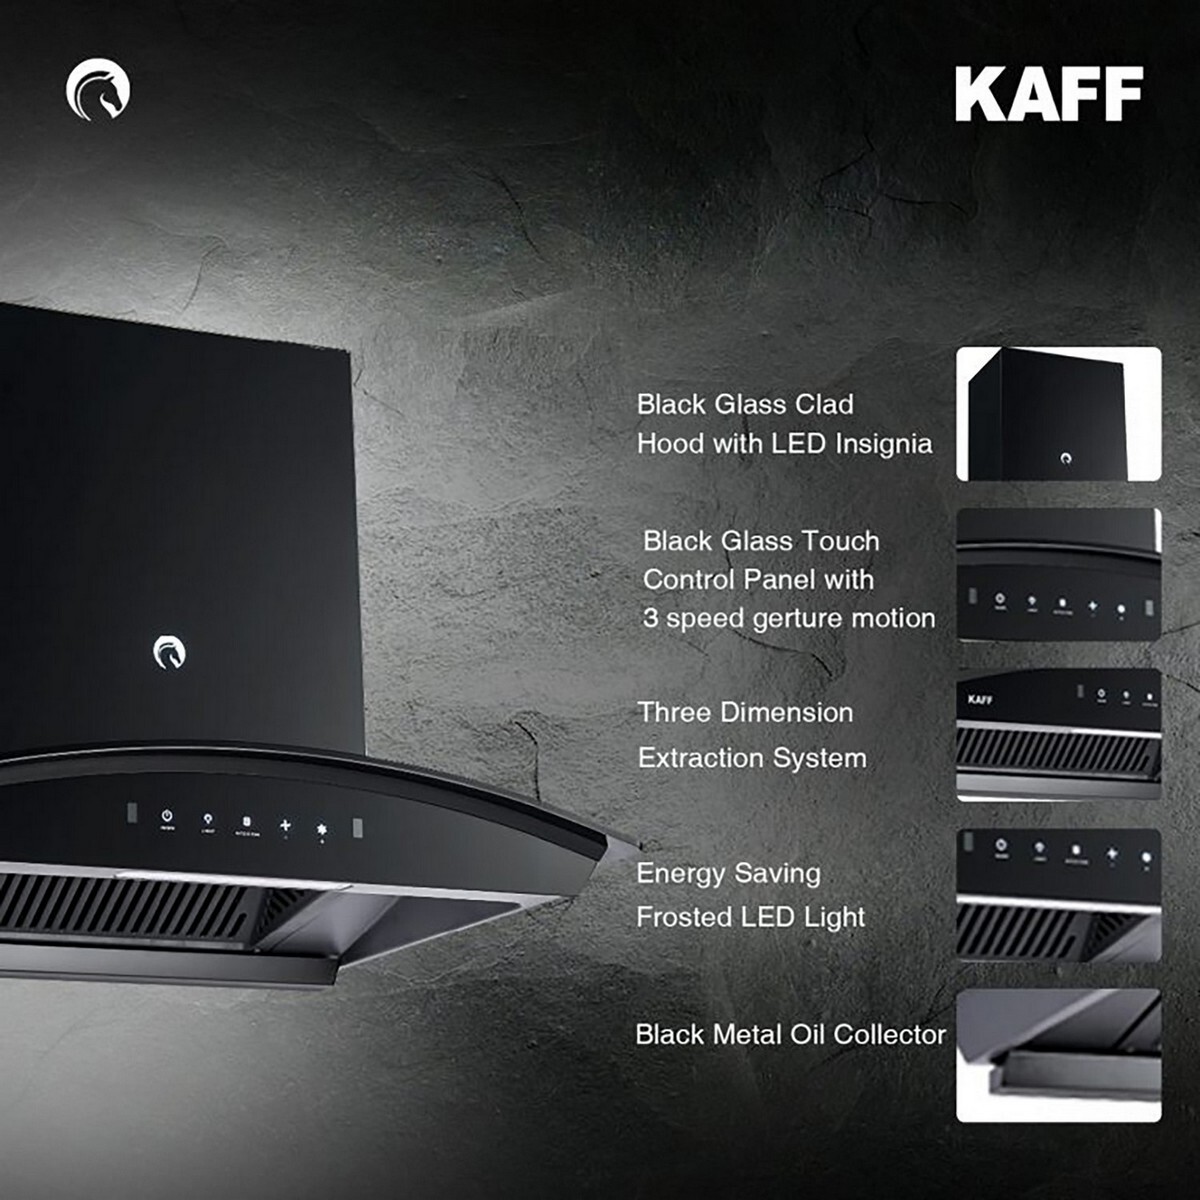 Kaff Auto Clean Wall Mounted Chimney Vasco DHC 75